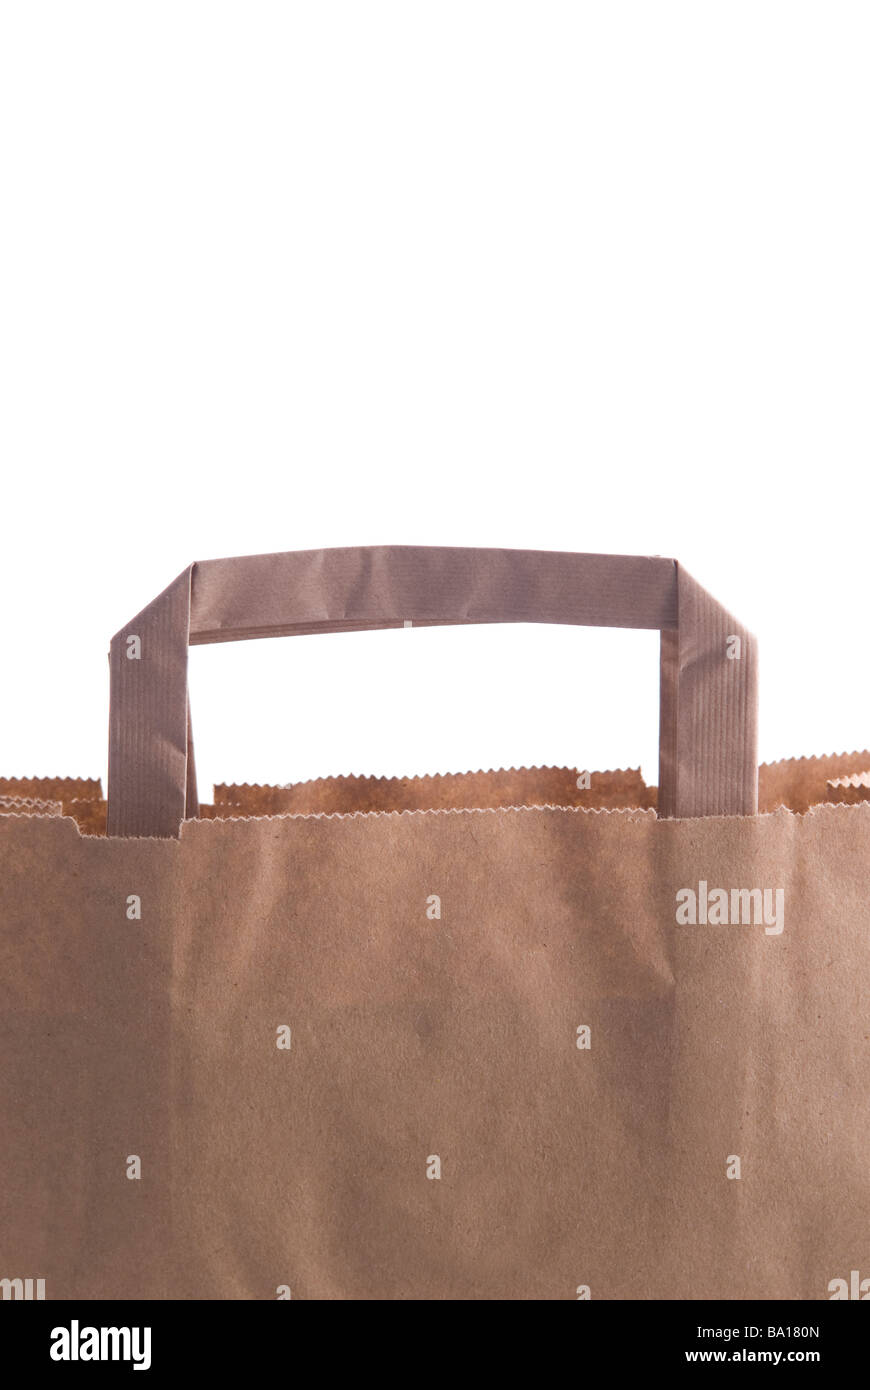 Handle of a brown paper shopping bag isolated against a white background Stock Photo